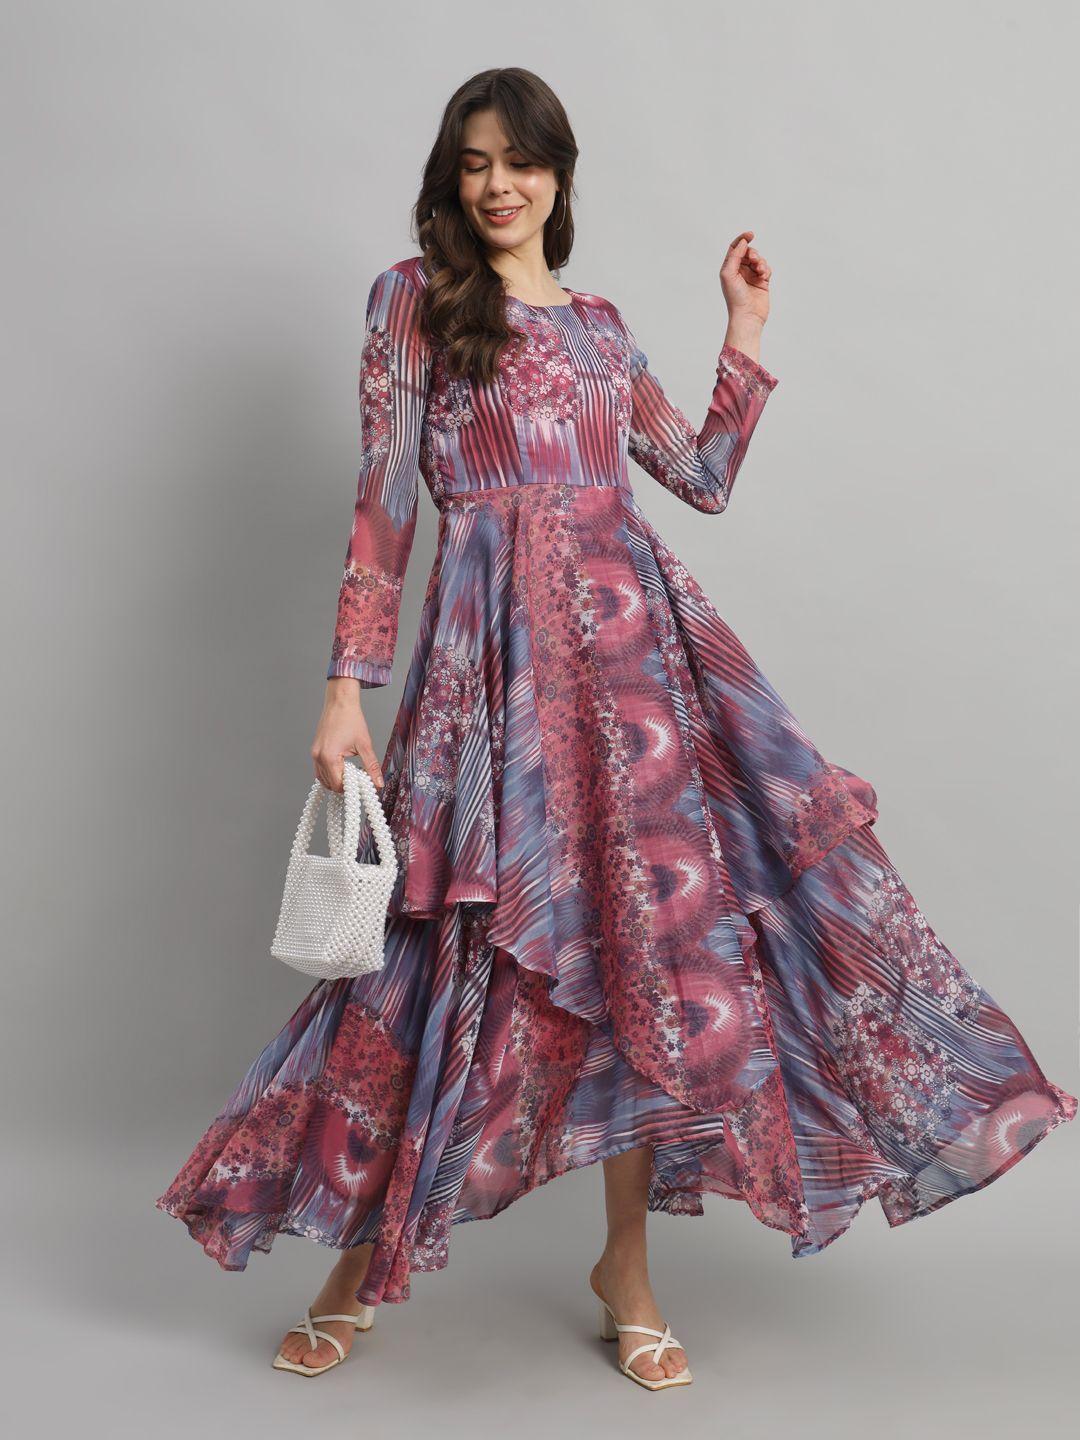 scorpius-round-neck-long-sleeves-floral-print-georgette-maxi-dress